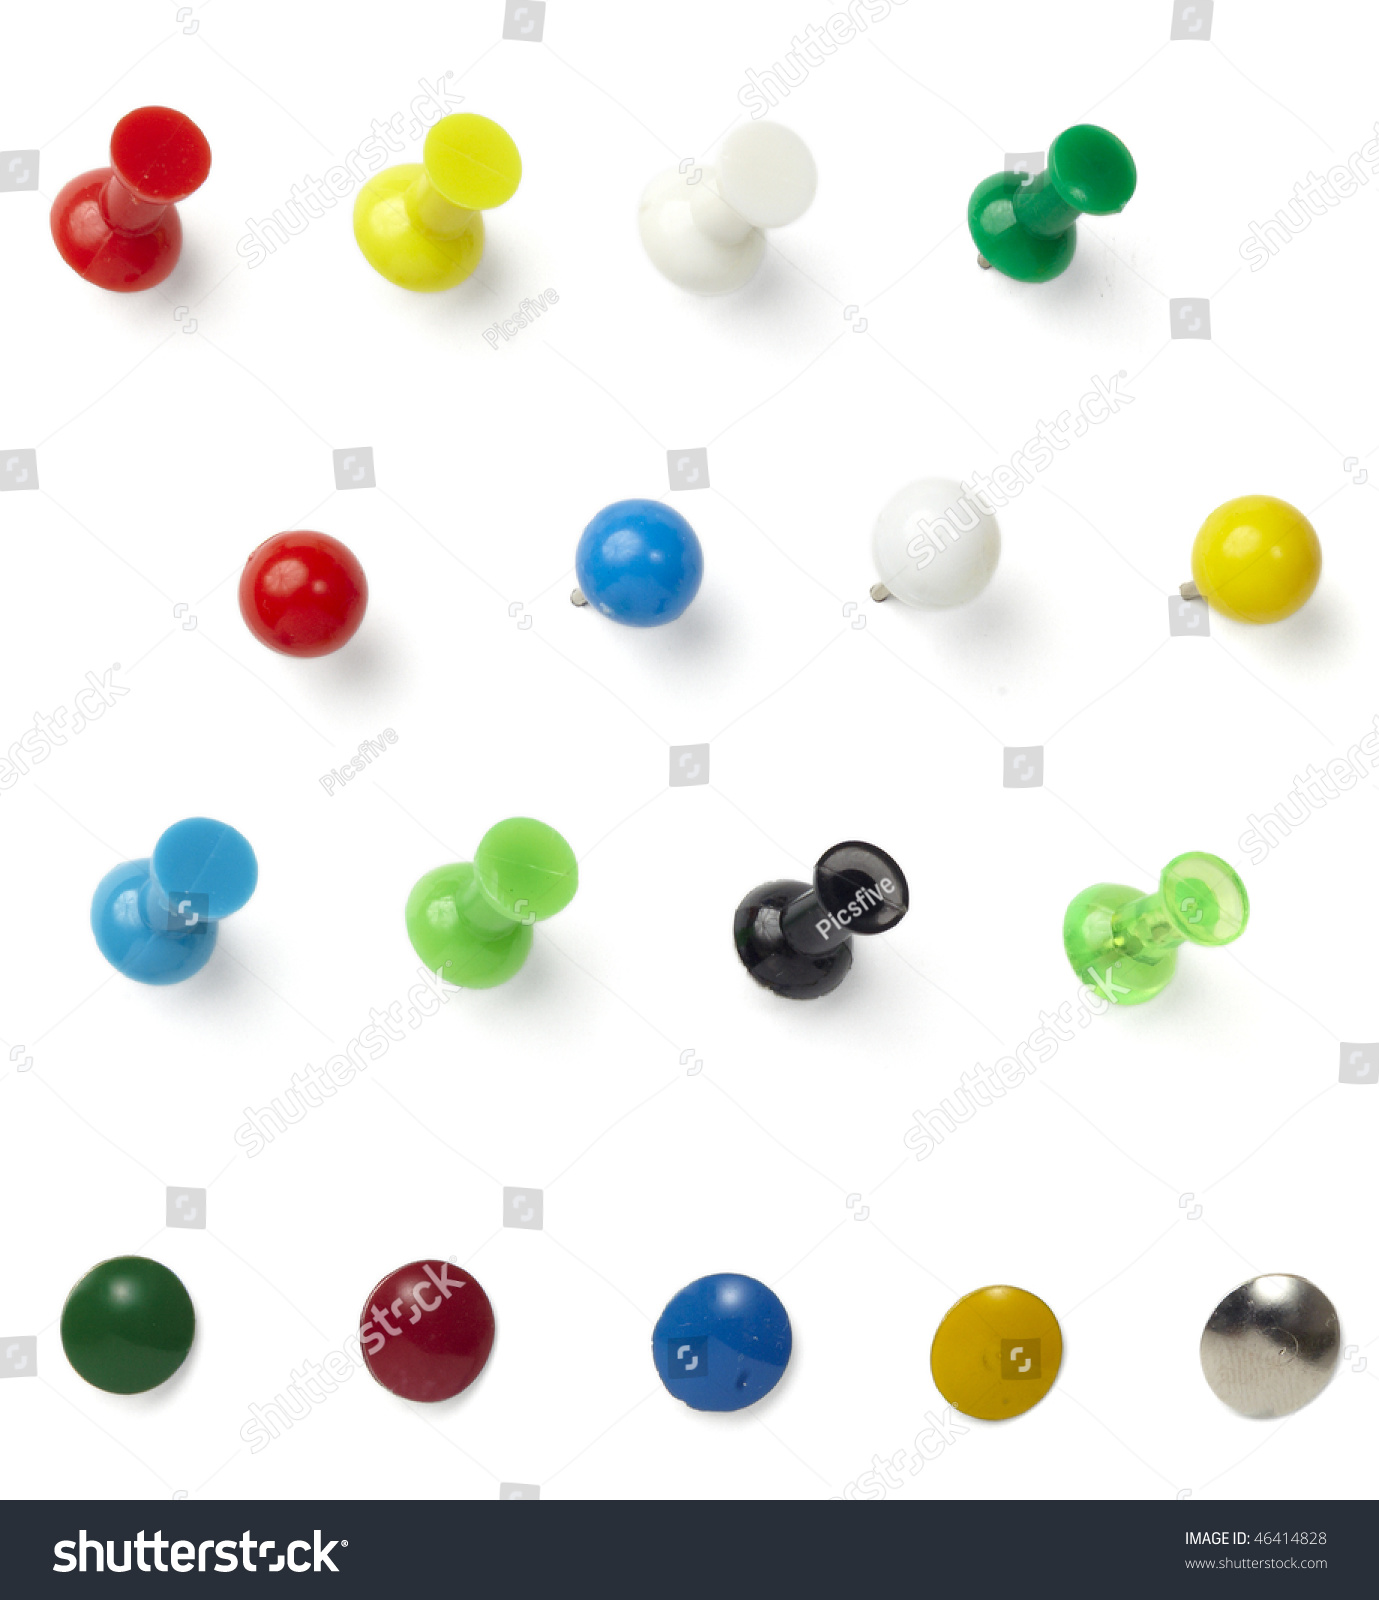 close up of various pushpins  on white background with clipping path #46414828